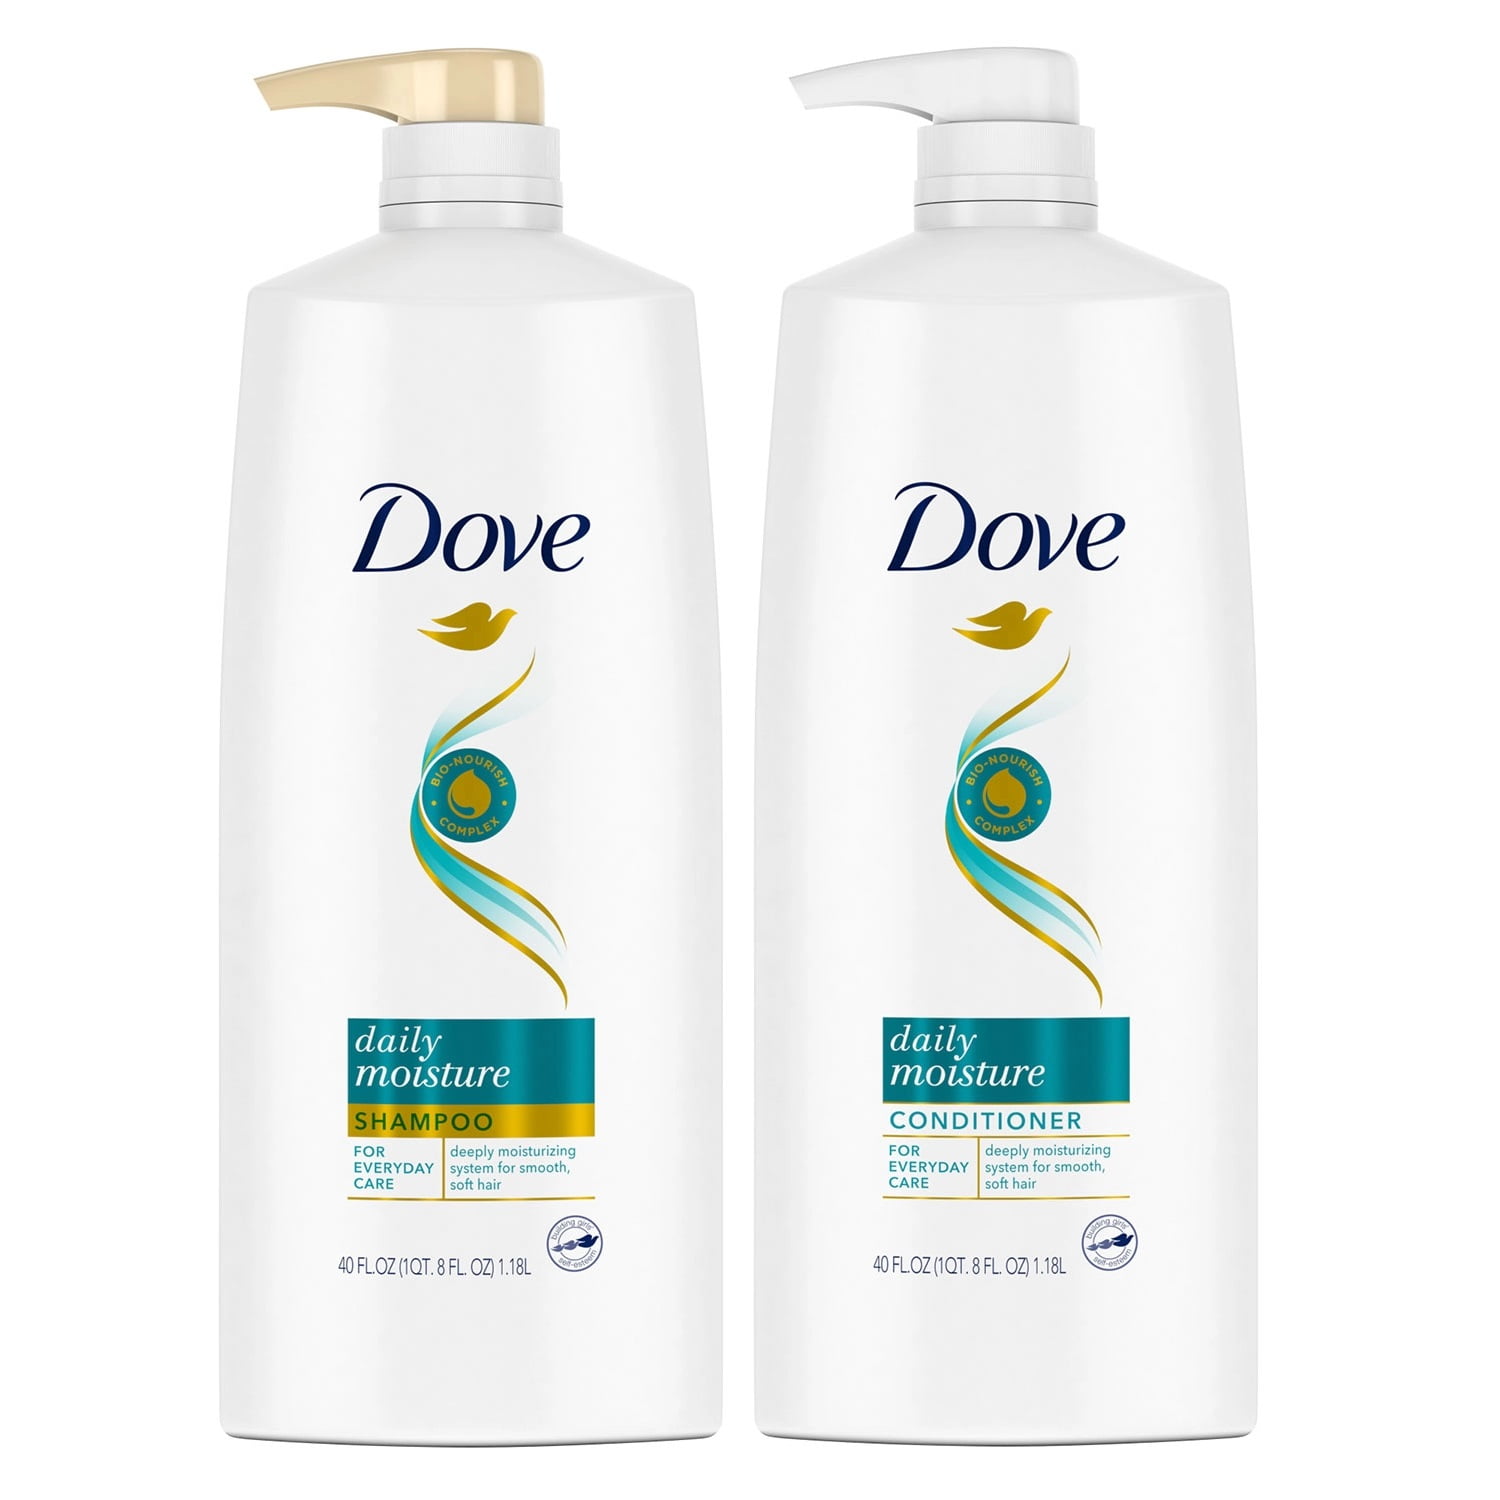 Dove Nutritive Solutions Daily Moisture, Shampoo and Conditioner Duo Set, 40 Ounce Pump Bottles Walmart.com